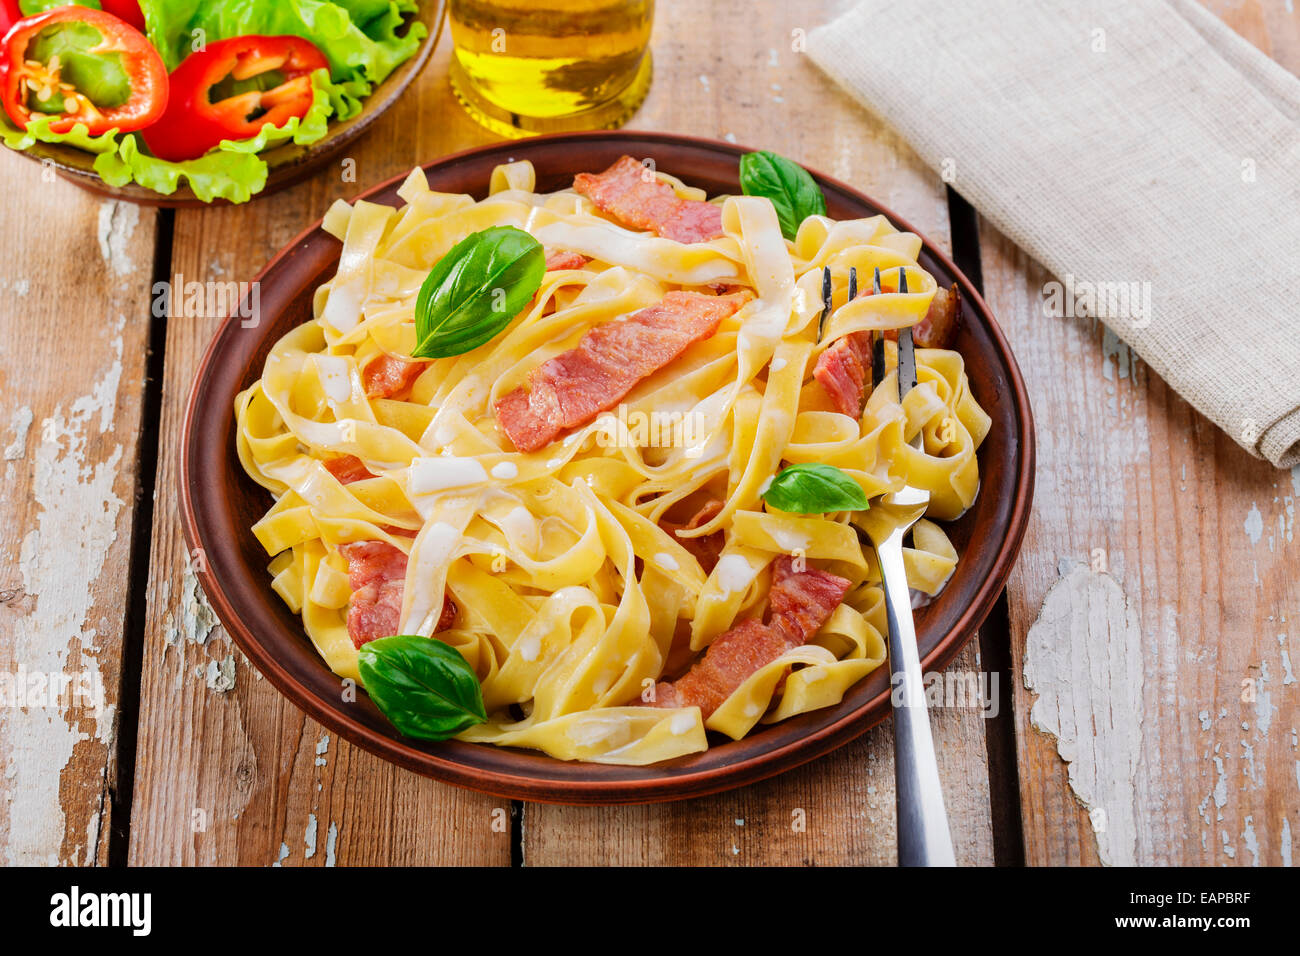 pasta carbonara with bacon and sauce Stock Photo